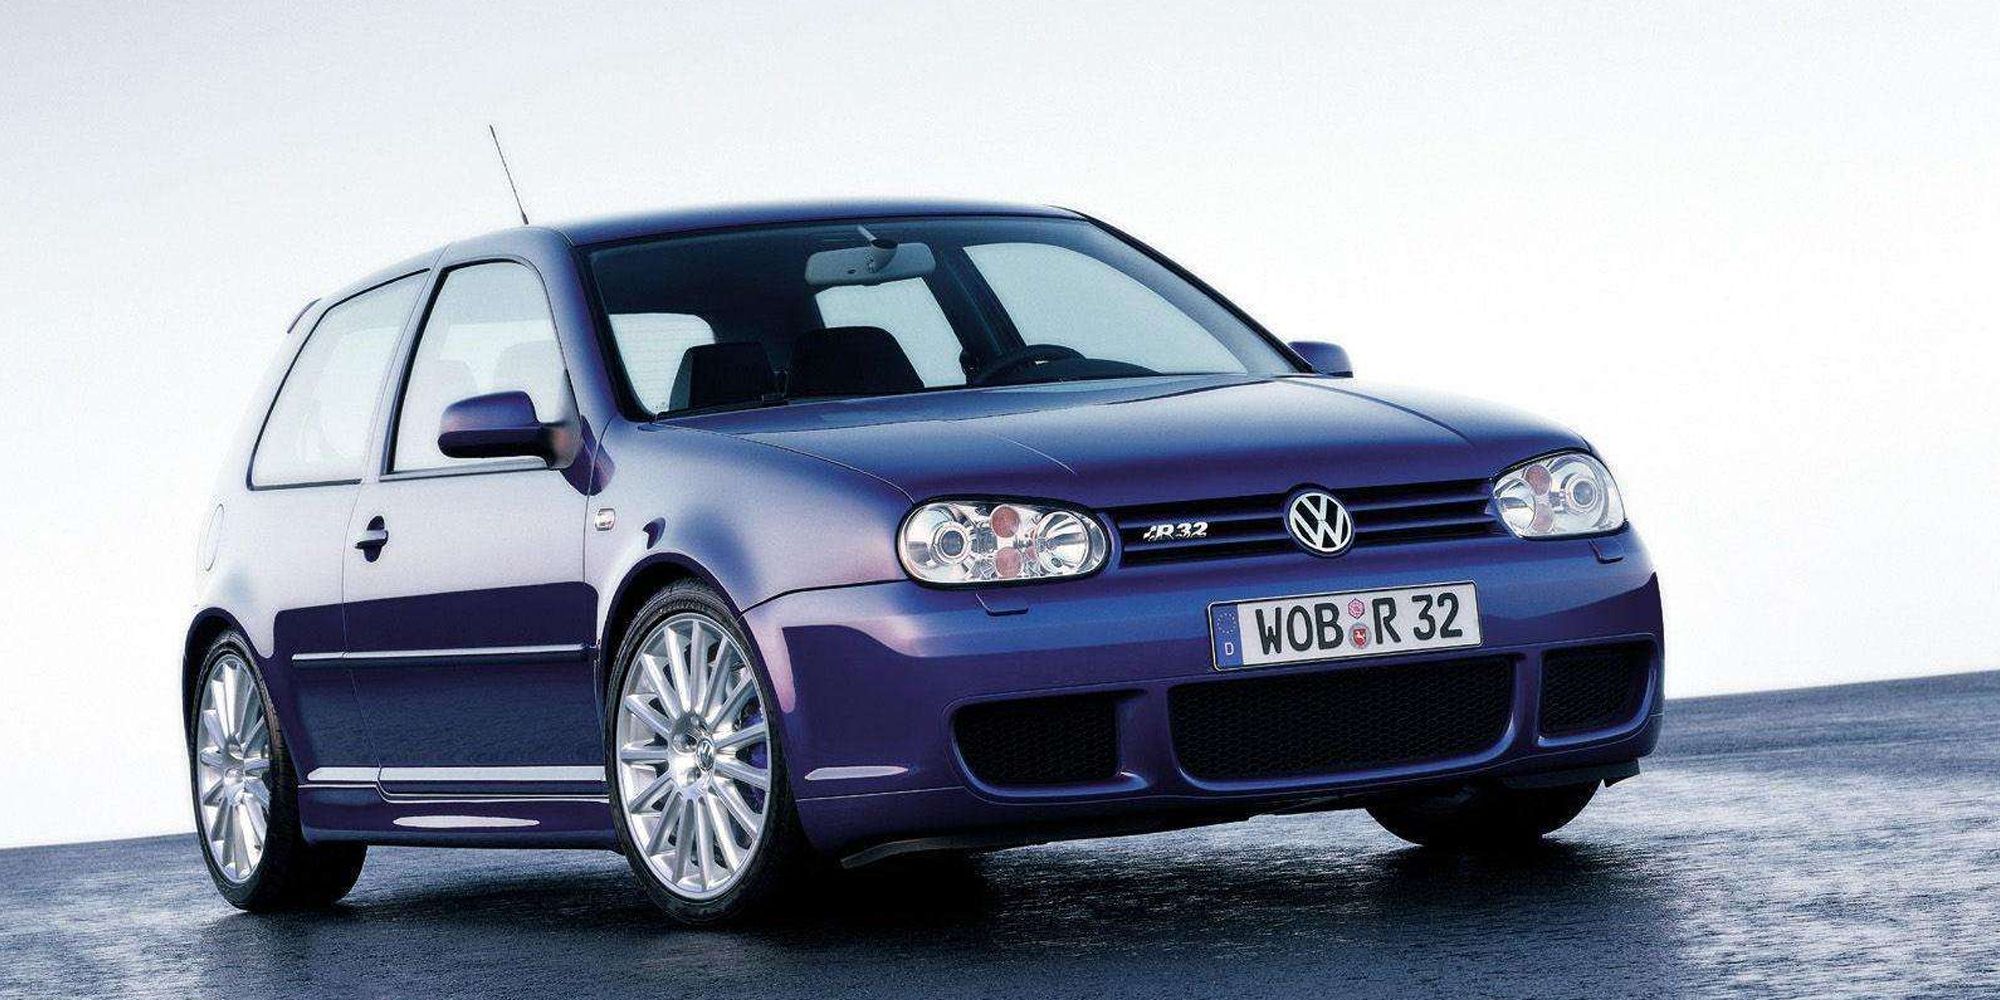 The front of the Mk4 Golf R32